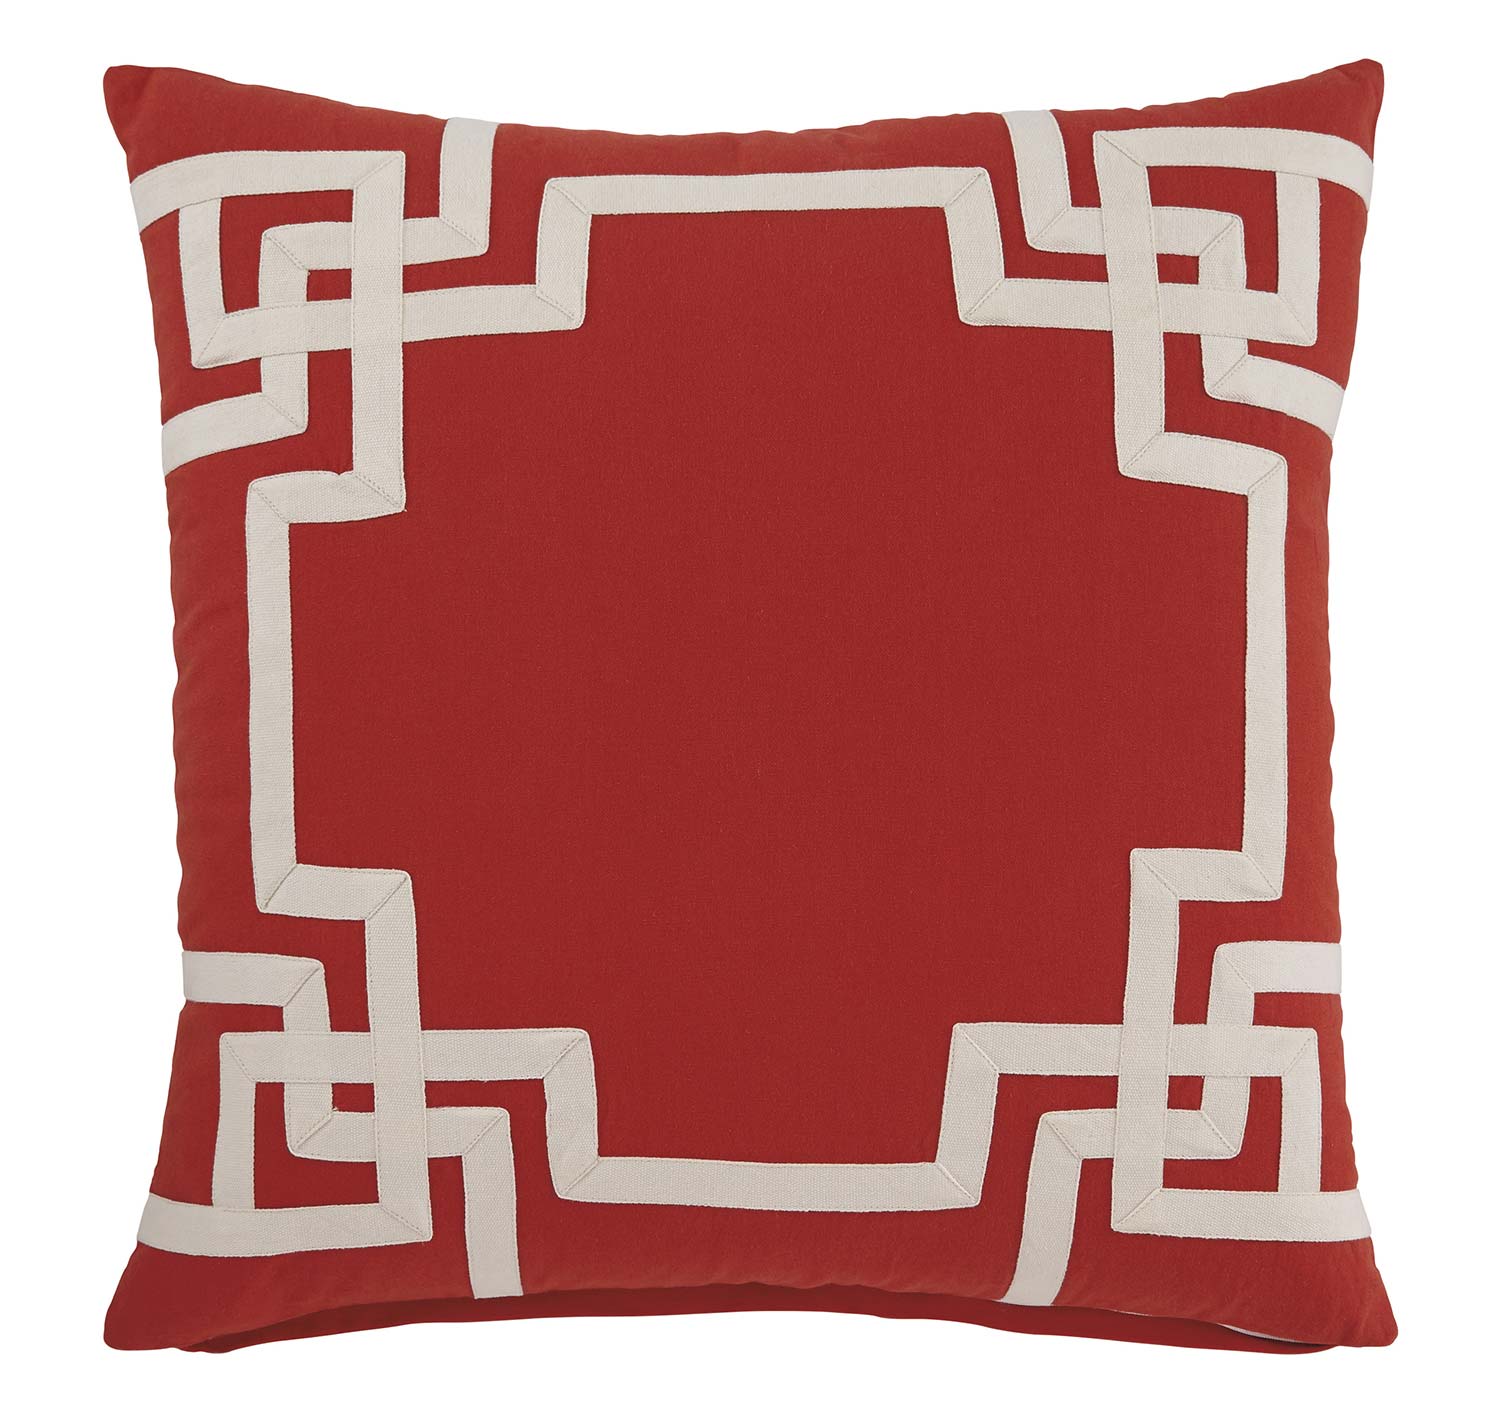 Ashley Vassal Pillow Cover - Coral